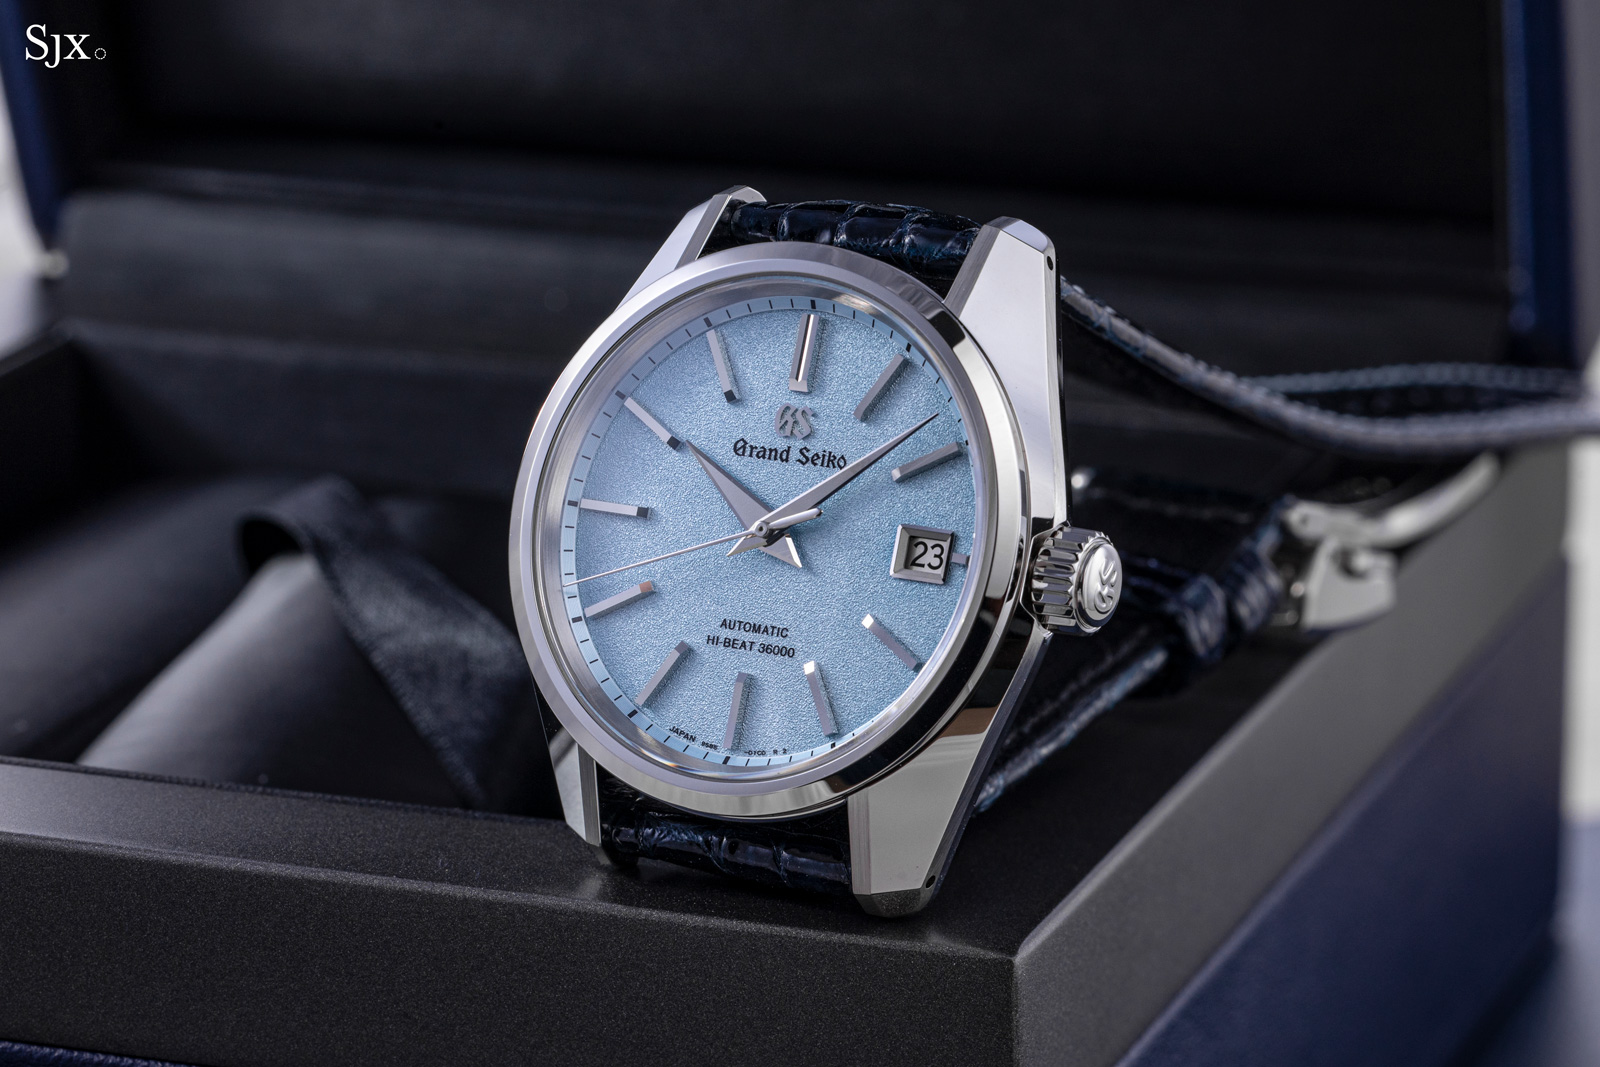 Close: Grand Seiko Collection SBGH287 “Snow on Blue | SJX Watches